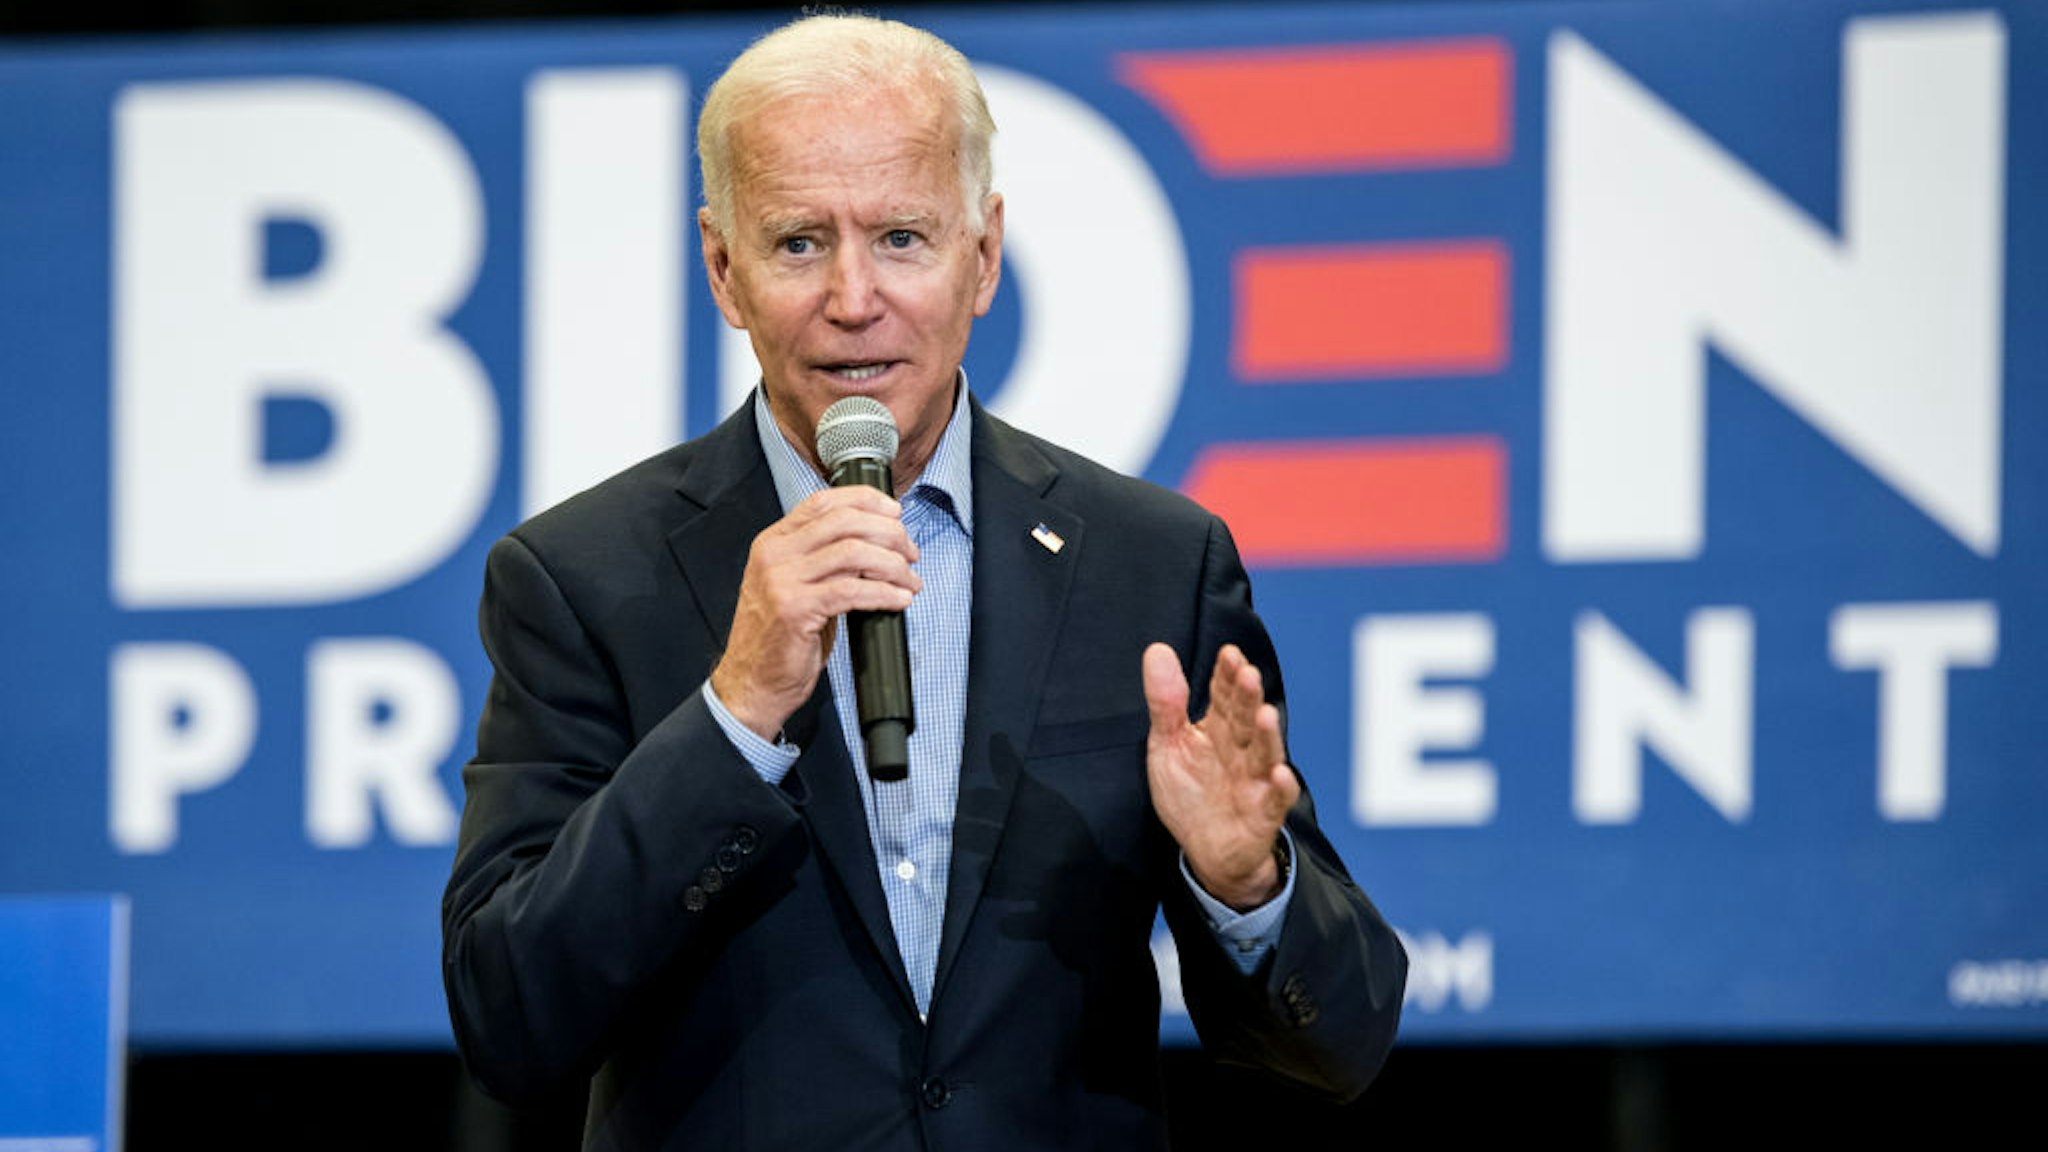 ROCK HILL, SC - AUGUST 29: Democratic presidential candidate and former US Vice President Joe Biden addresses a crowd at a town hall event at Clinton College on August 29, 2019 in Rock Hill, South Carolina. Biden spent Wednesday and Thursday campaigning in the early primary state.